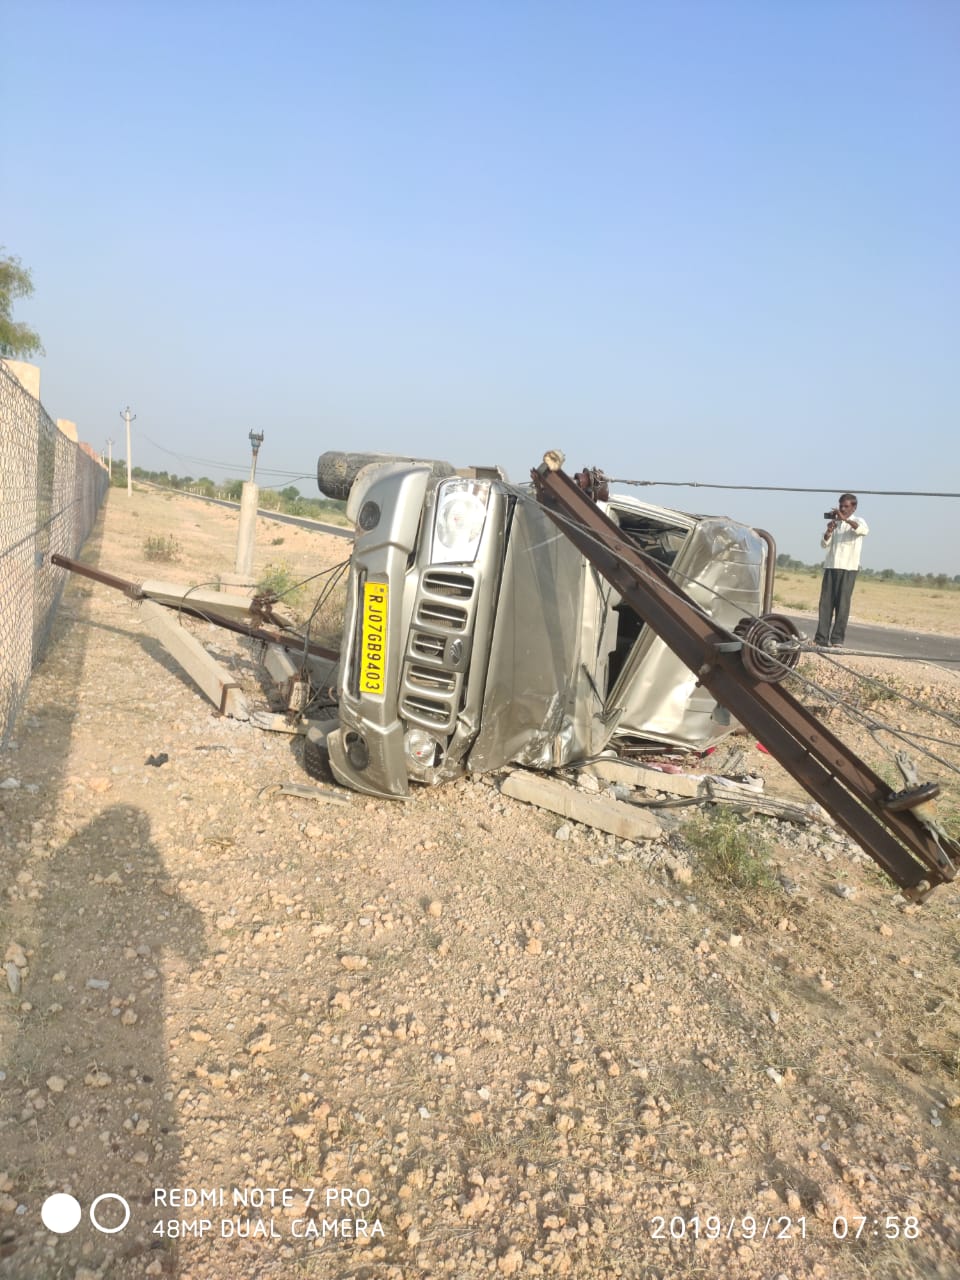 bikaner news- Pickup collided with pole, two killed